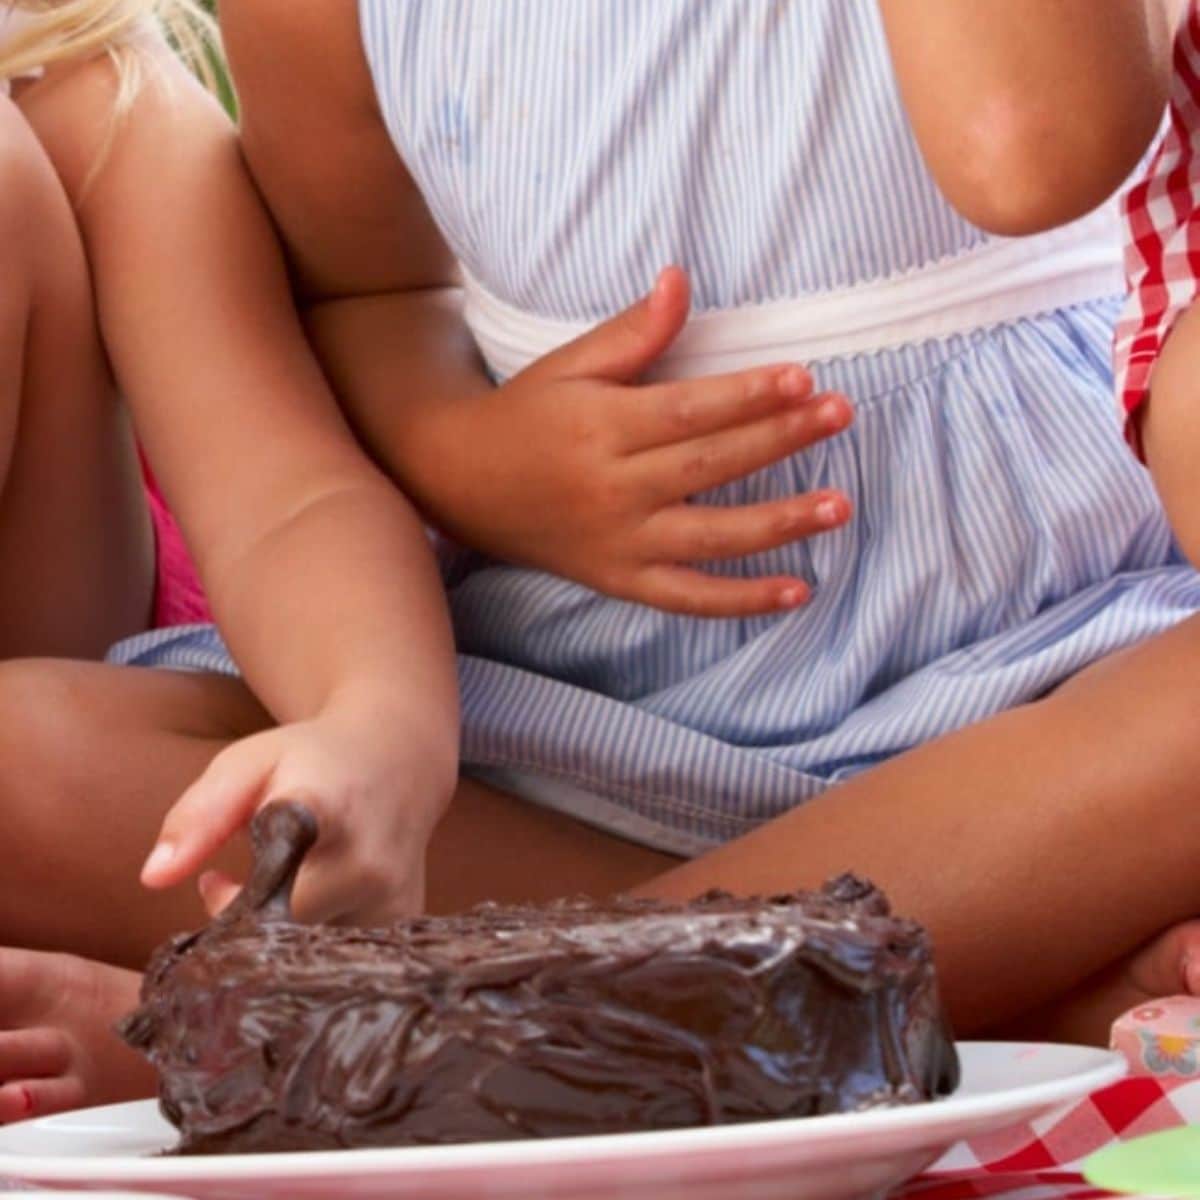 Young kids touching a cake on a plate.